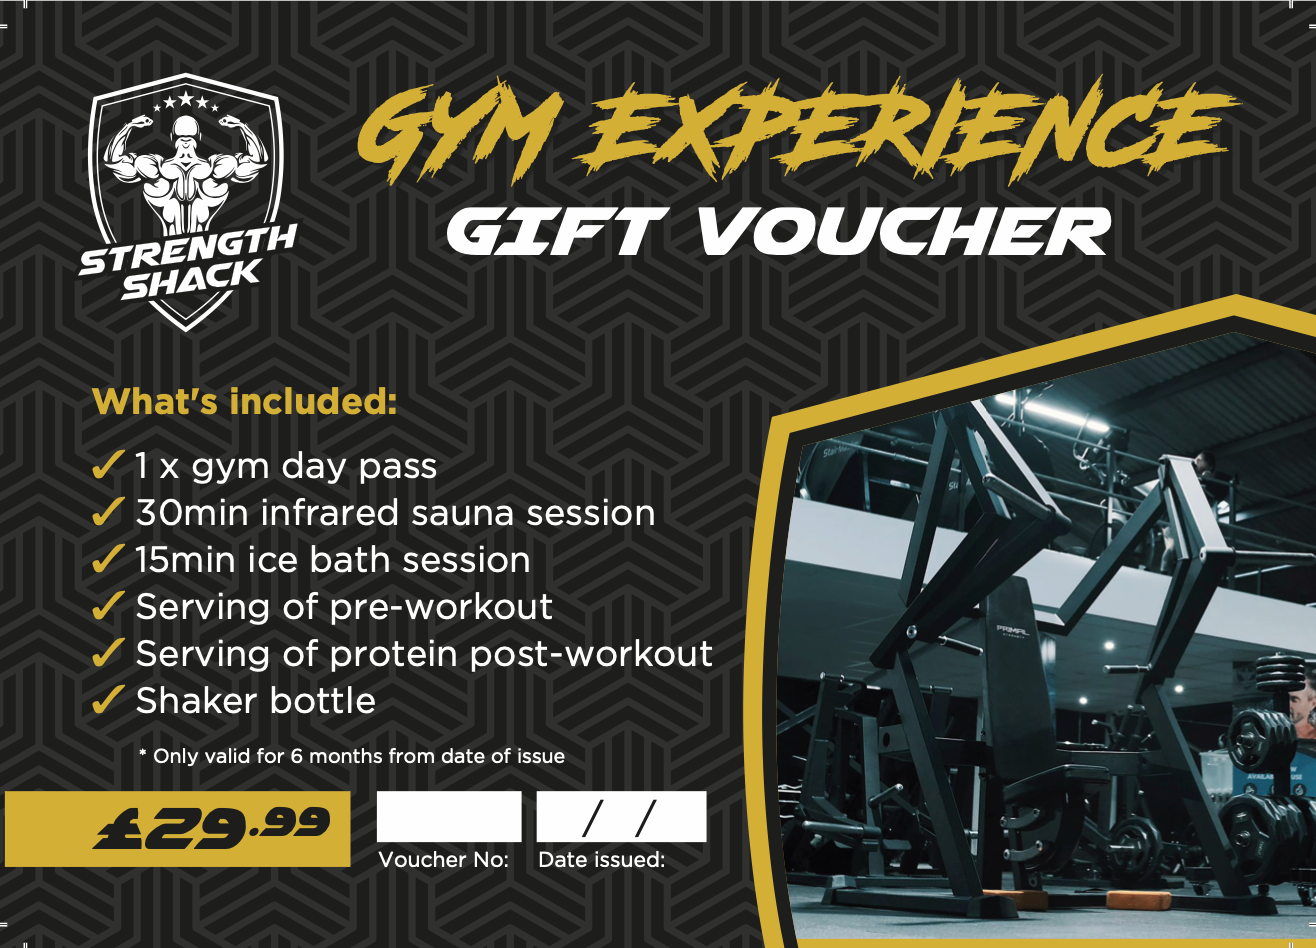 Strength Shack - Gym Experience Gift Voucher